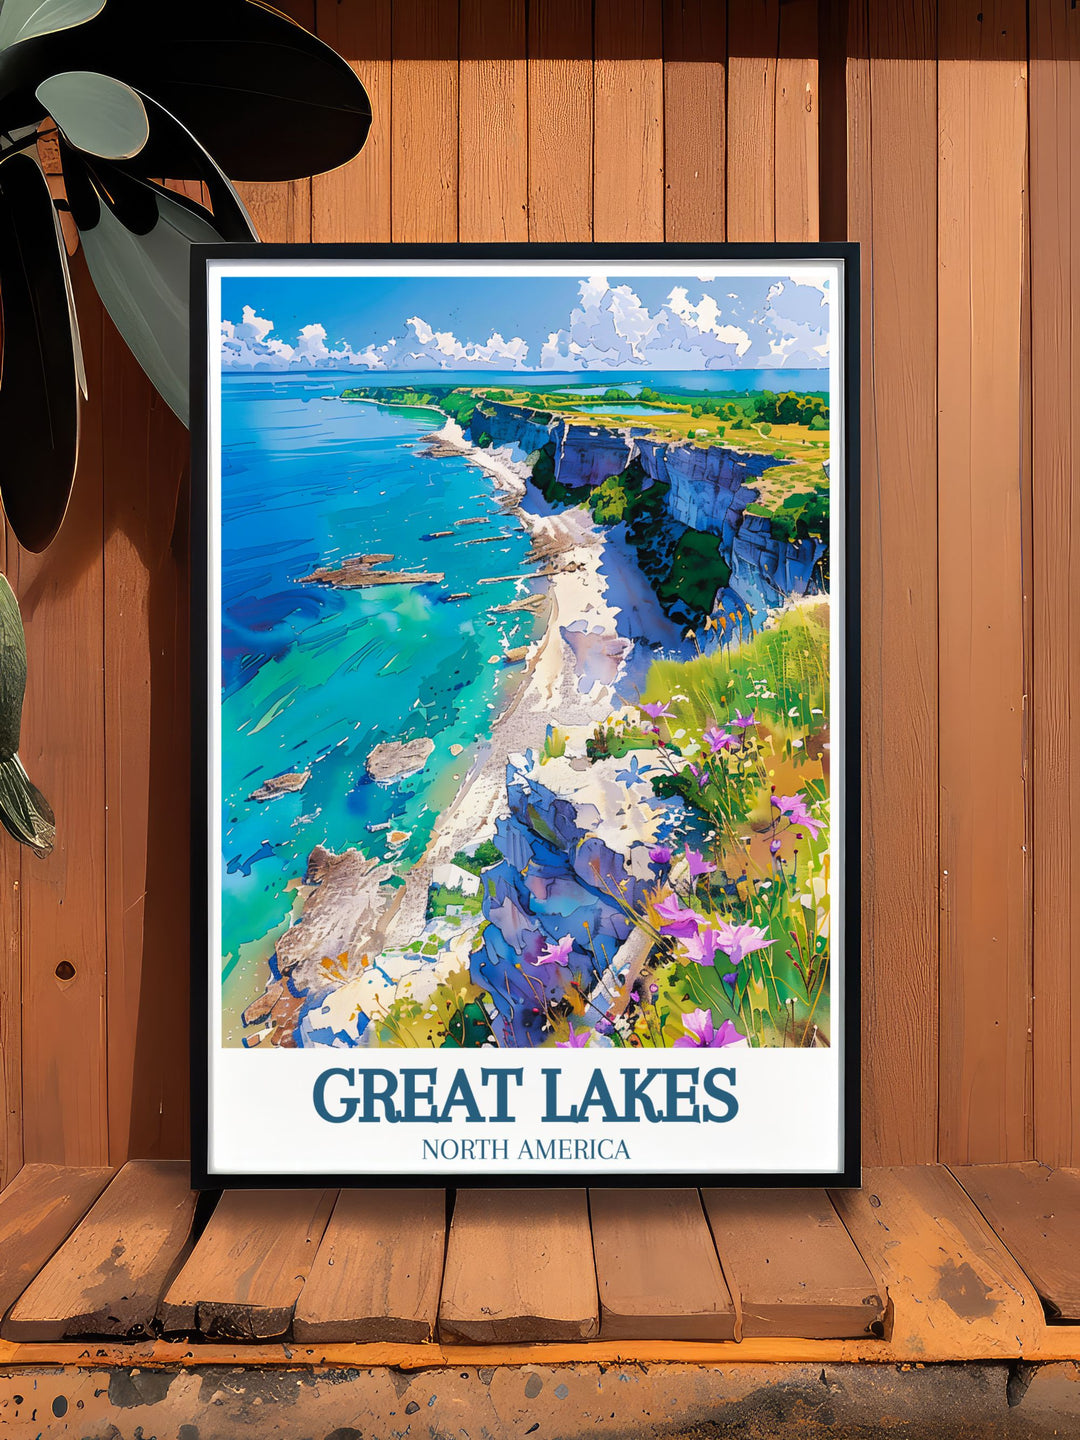 Featuring the historic Kelleys Island, this travel poster highlights the islands glacial grooves and charming vineyards, offering a glimpse into its fascinating past.